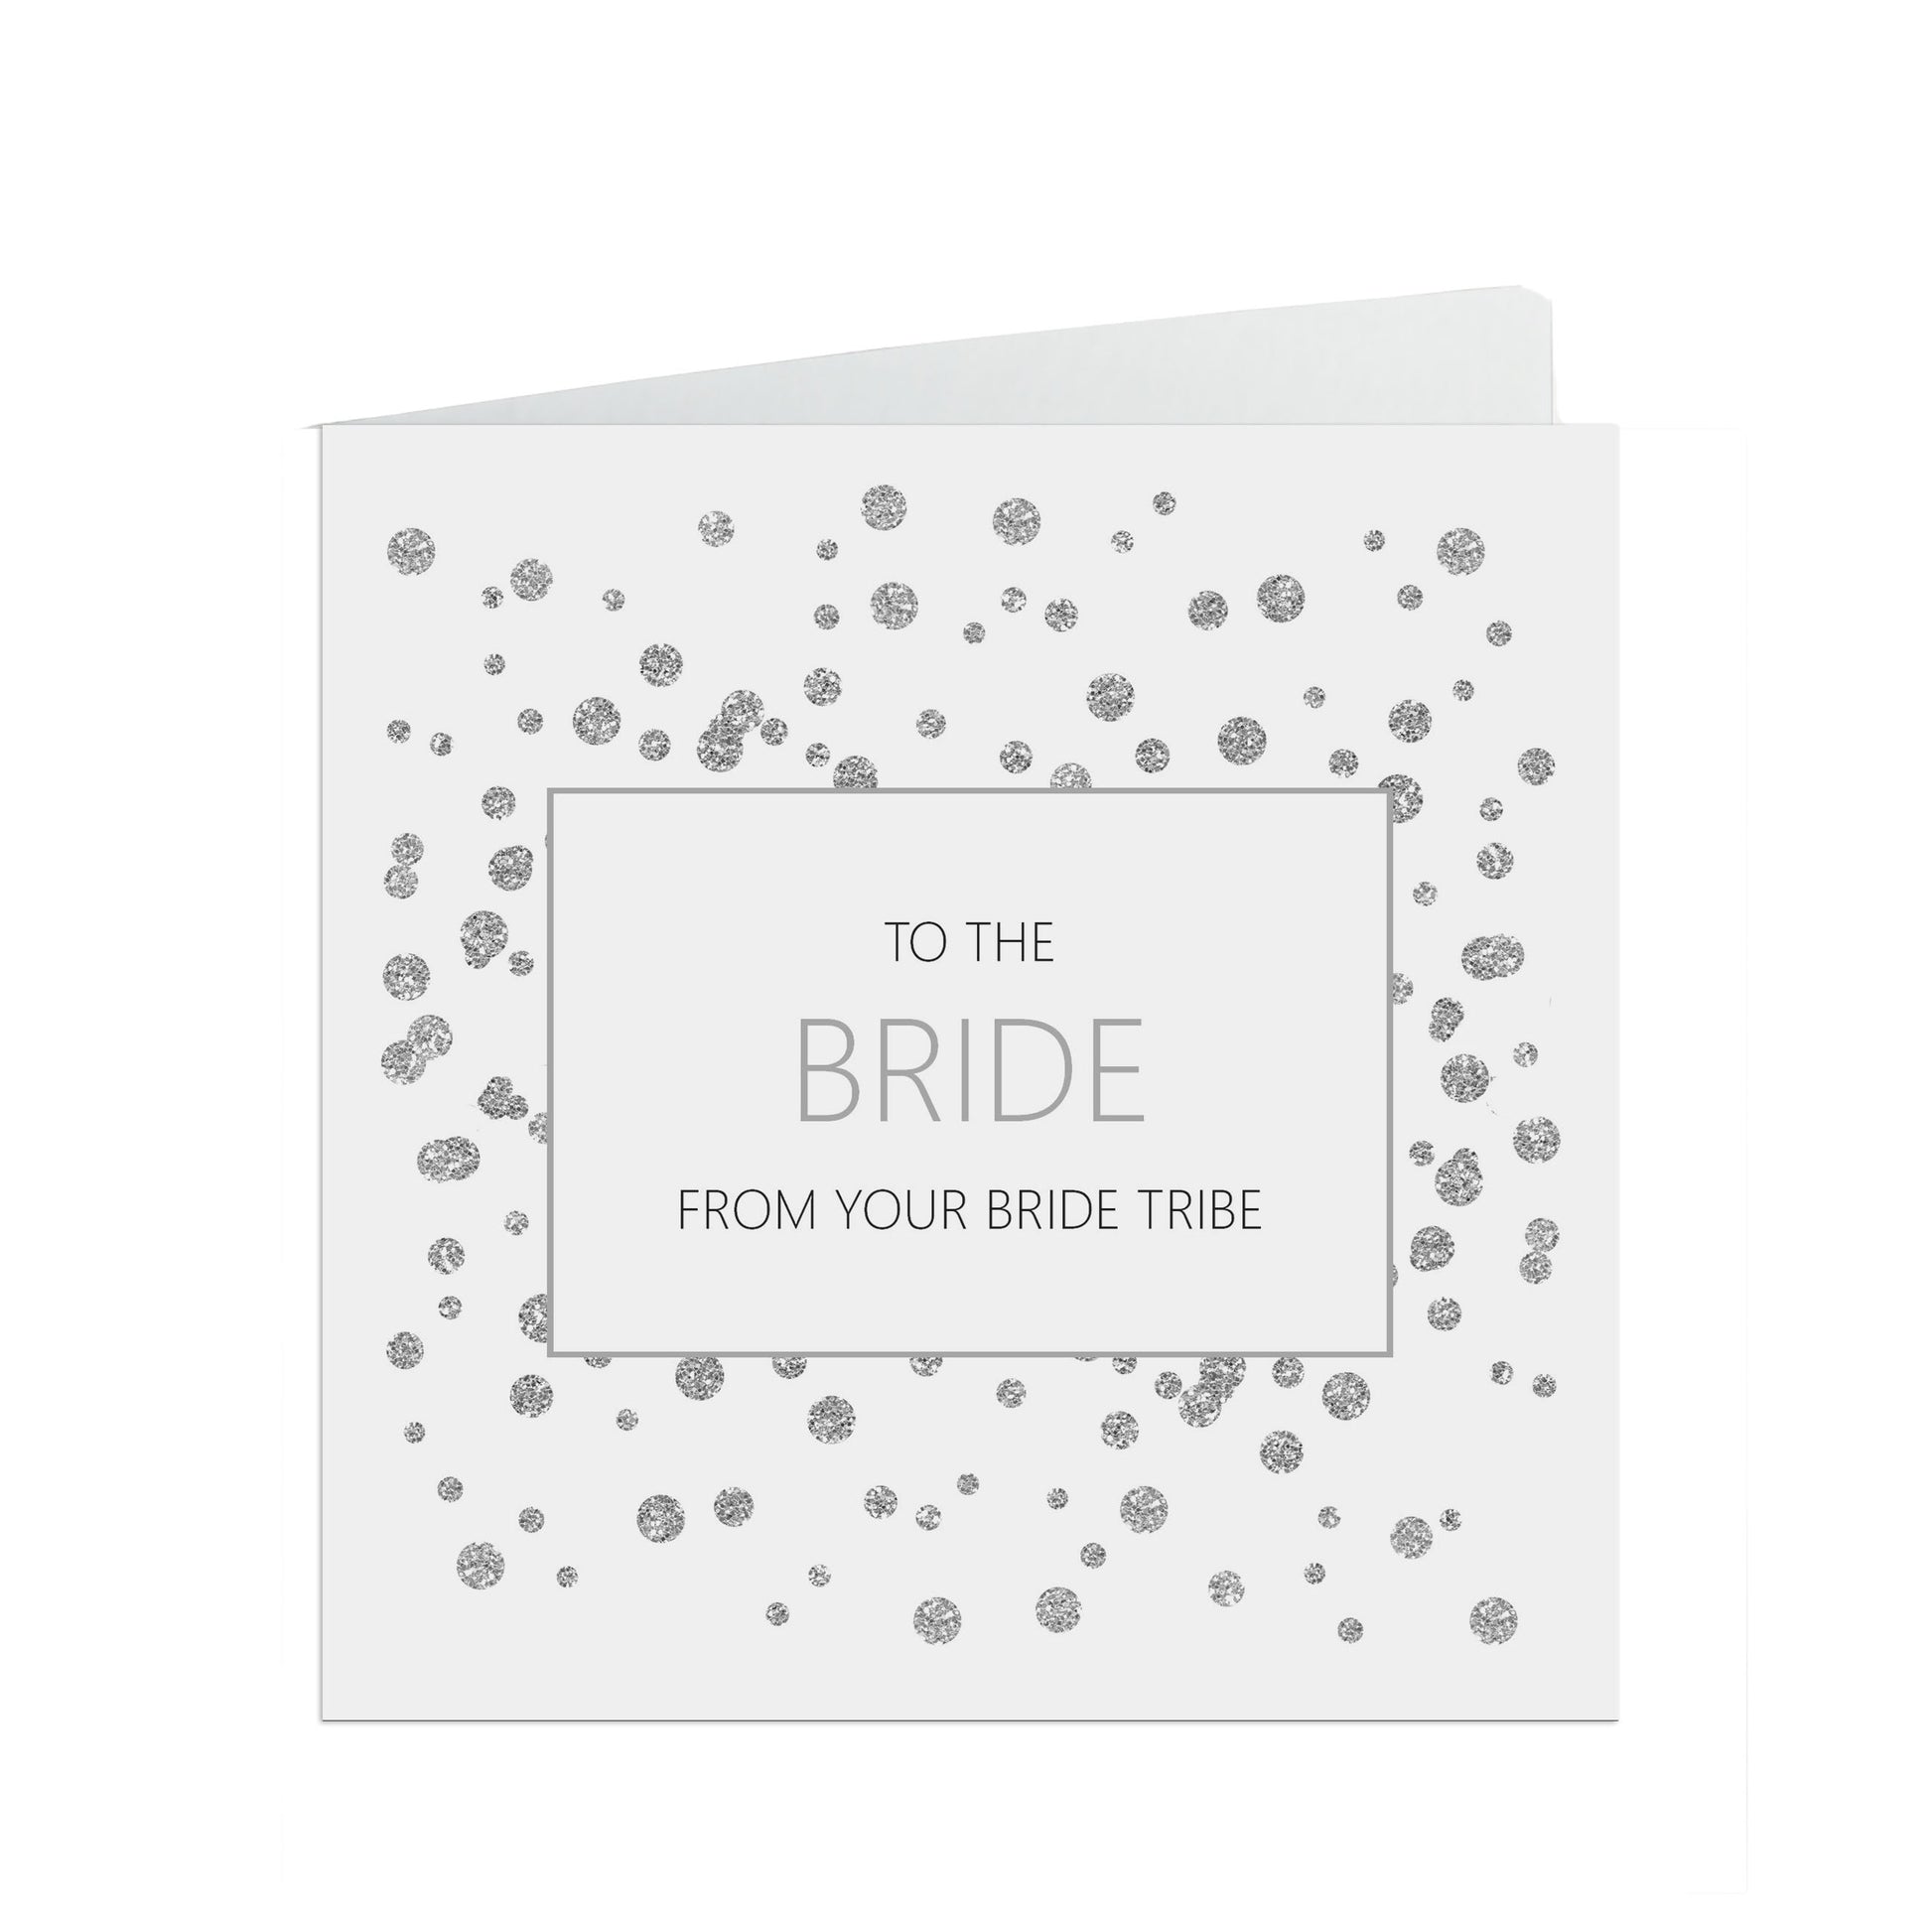 Bride From Your Tribe Wedding Day Card, Silver Effect 6x6 Inches With A White Envelope